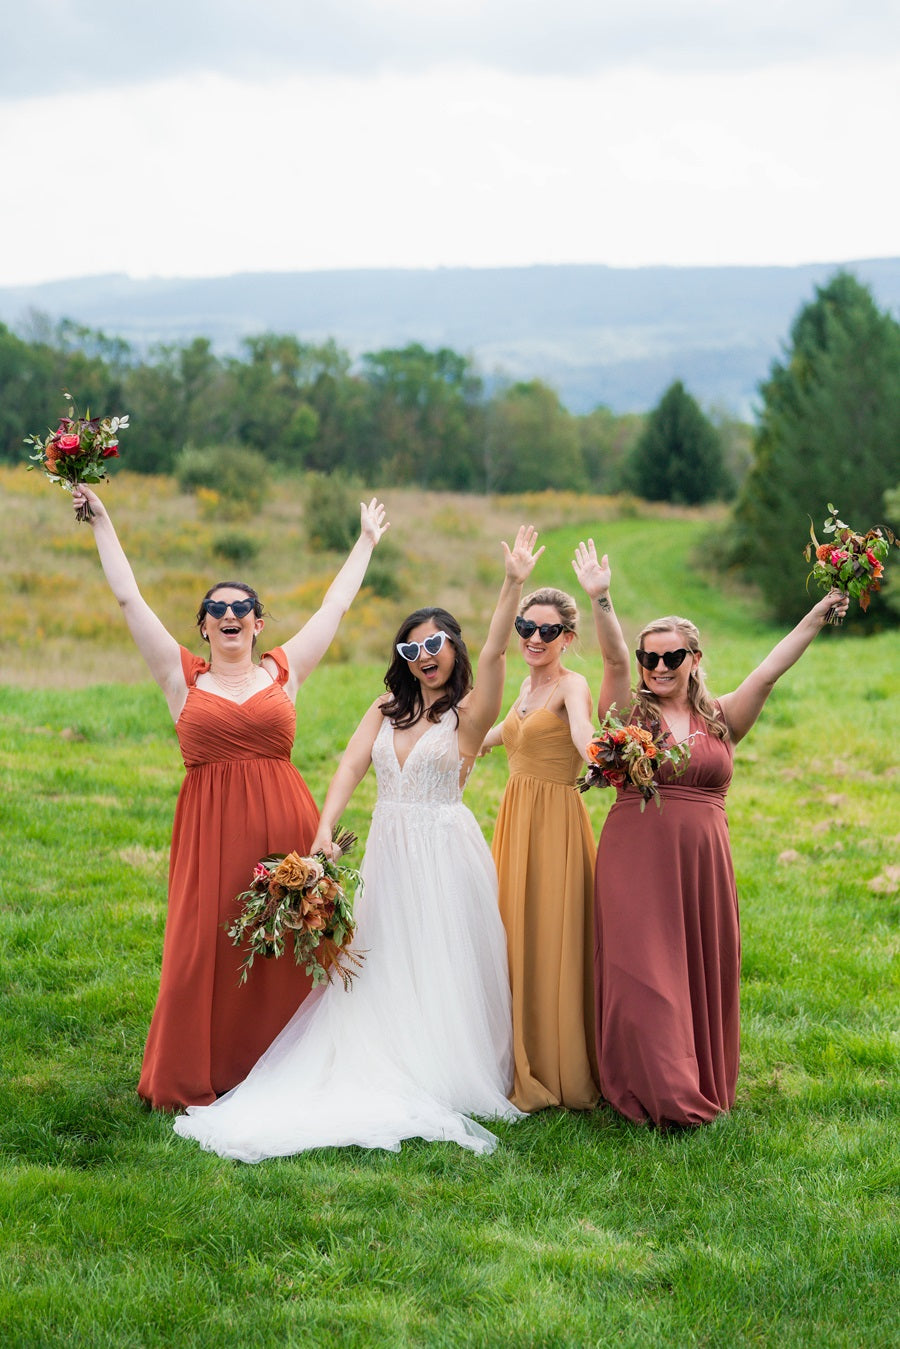 Bridal party wearing heart glasses, wearing a fall color palette, raising their arms in the air.